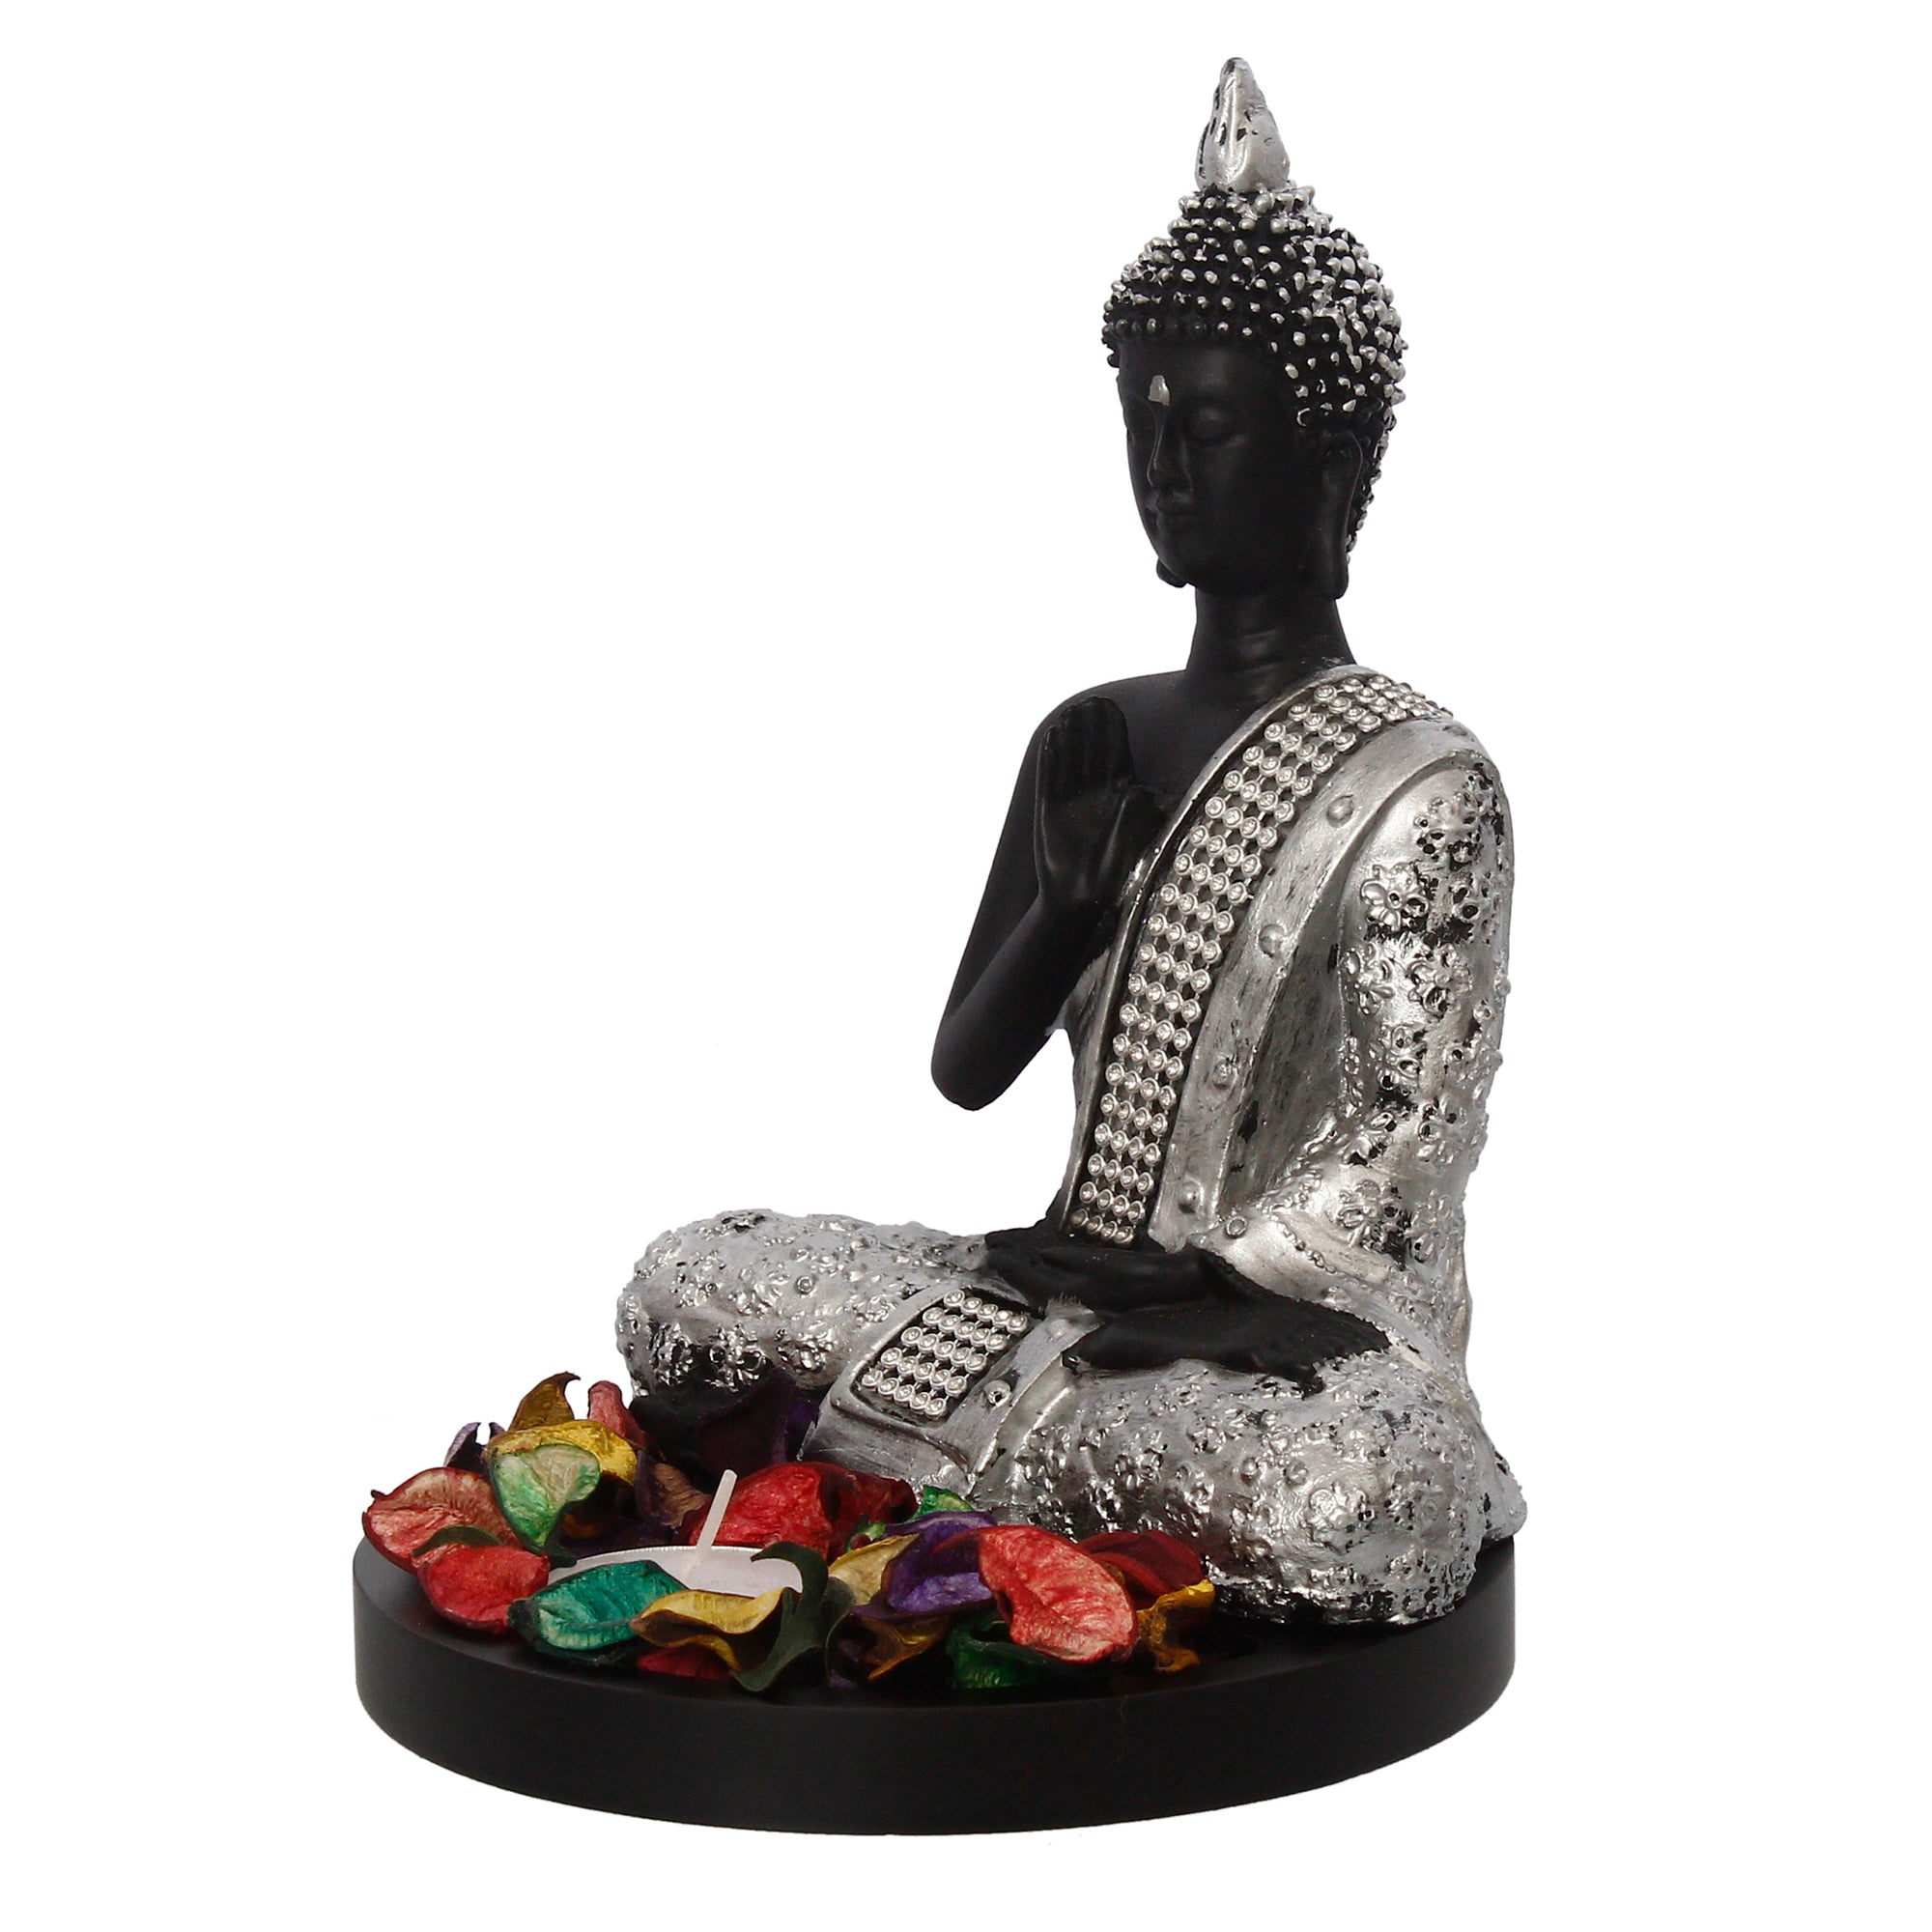 Polyresin Black and Silver Handcrafted Meditating Blessing Buddha Statue with Wooden Base, Fragranced Petals and Tealight 5